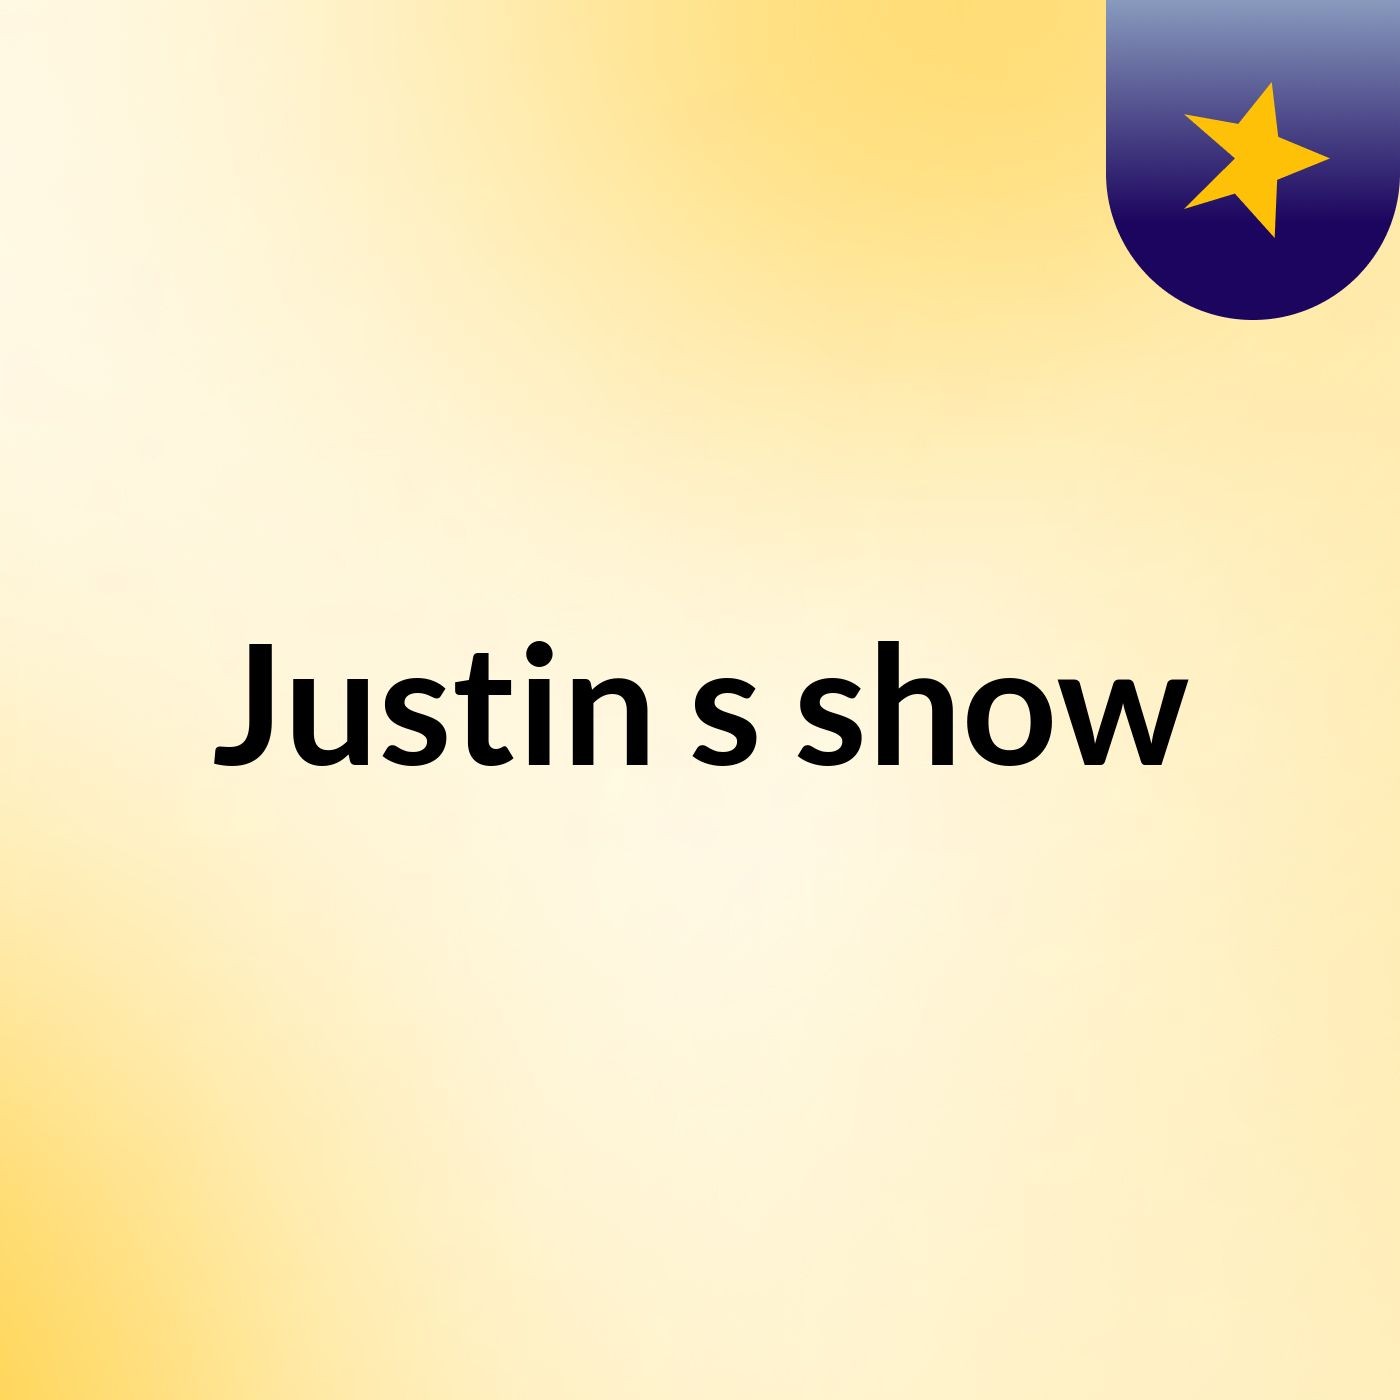 Justin's show